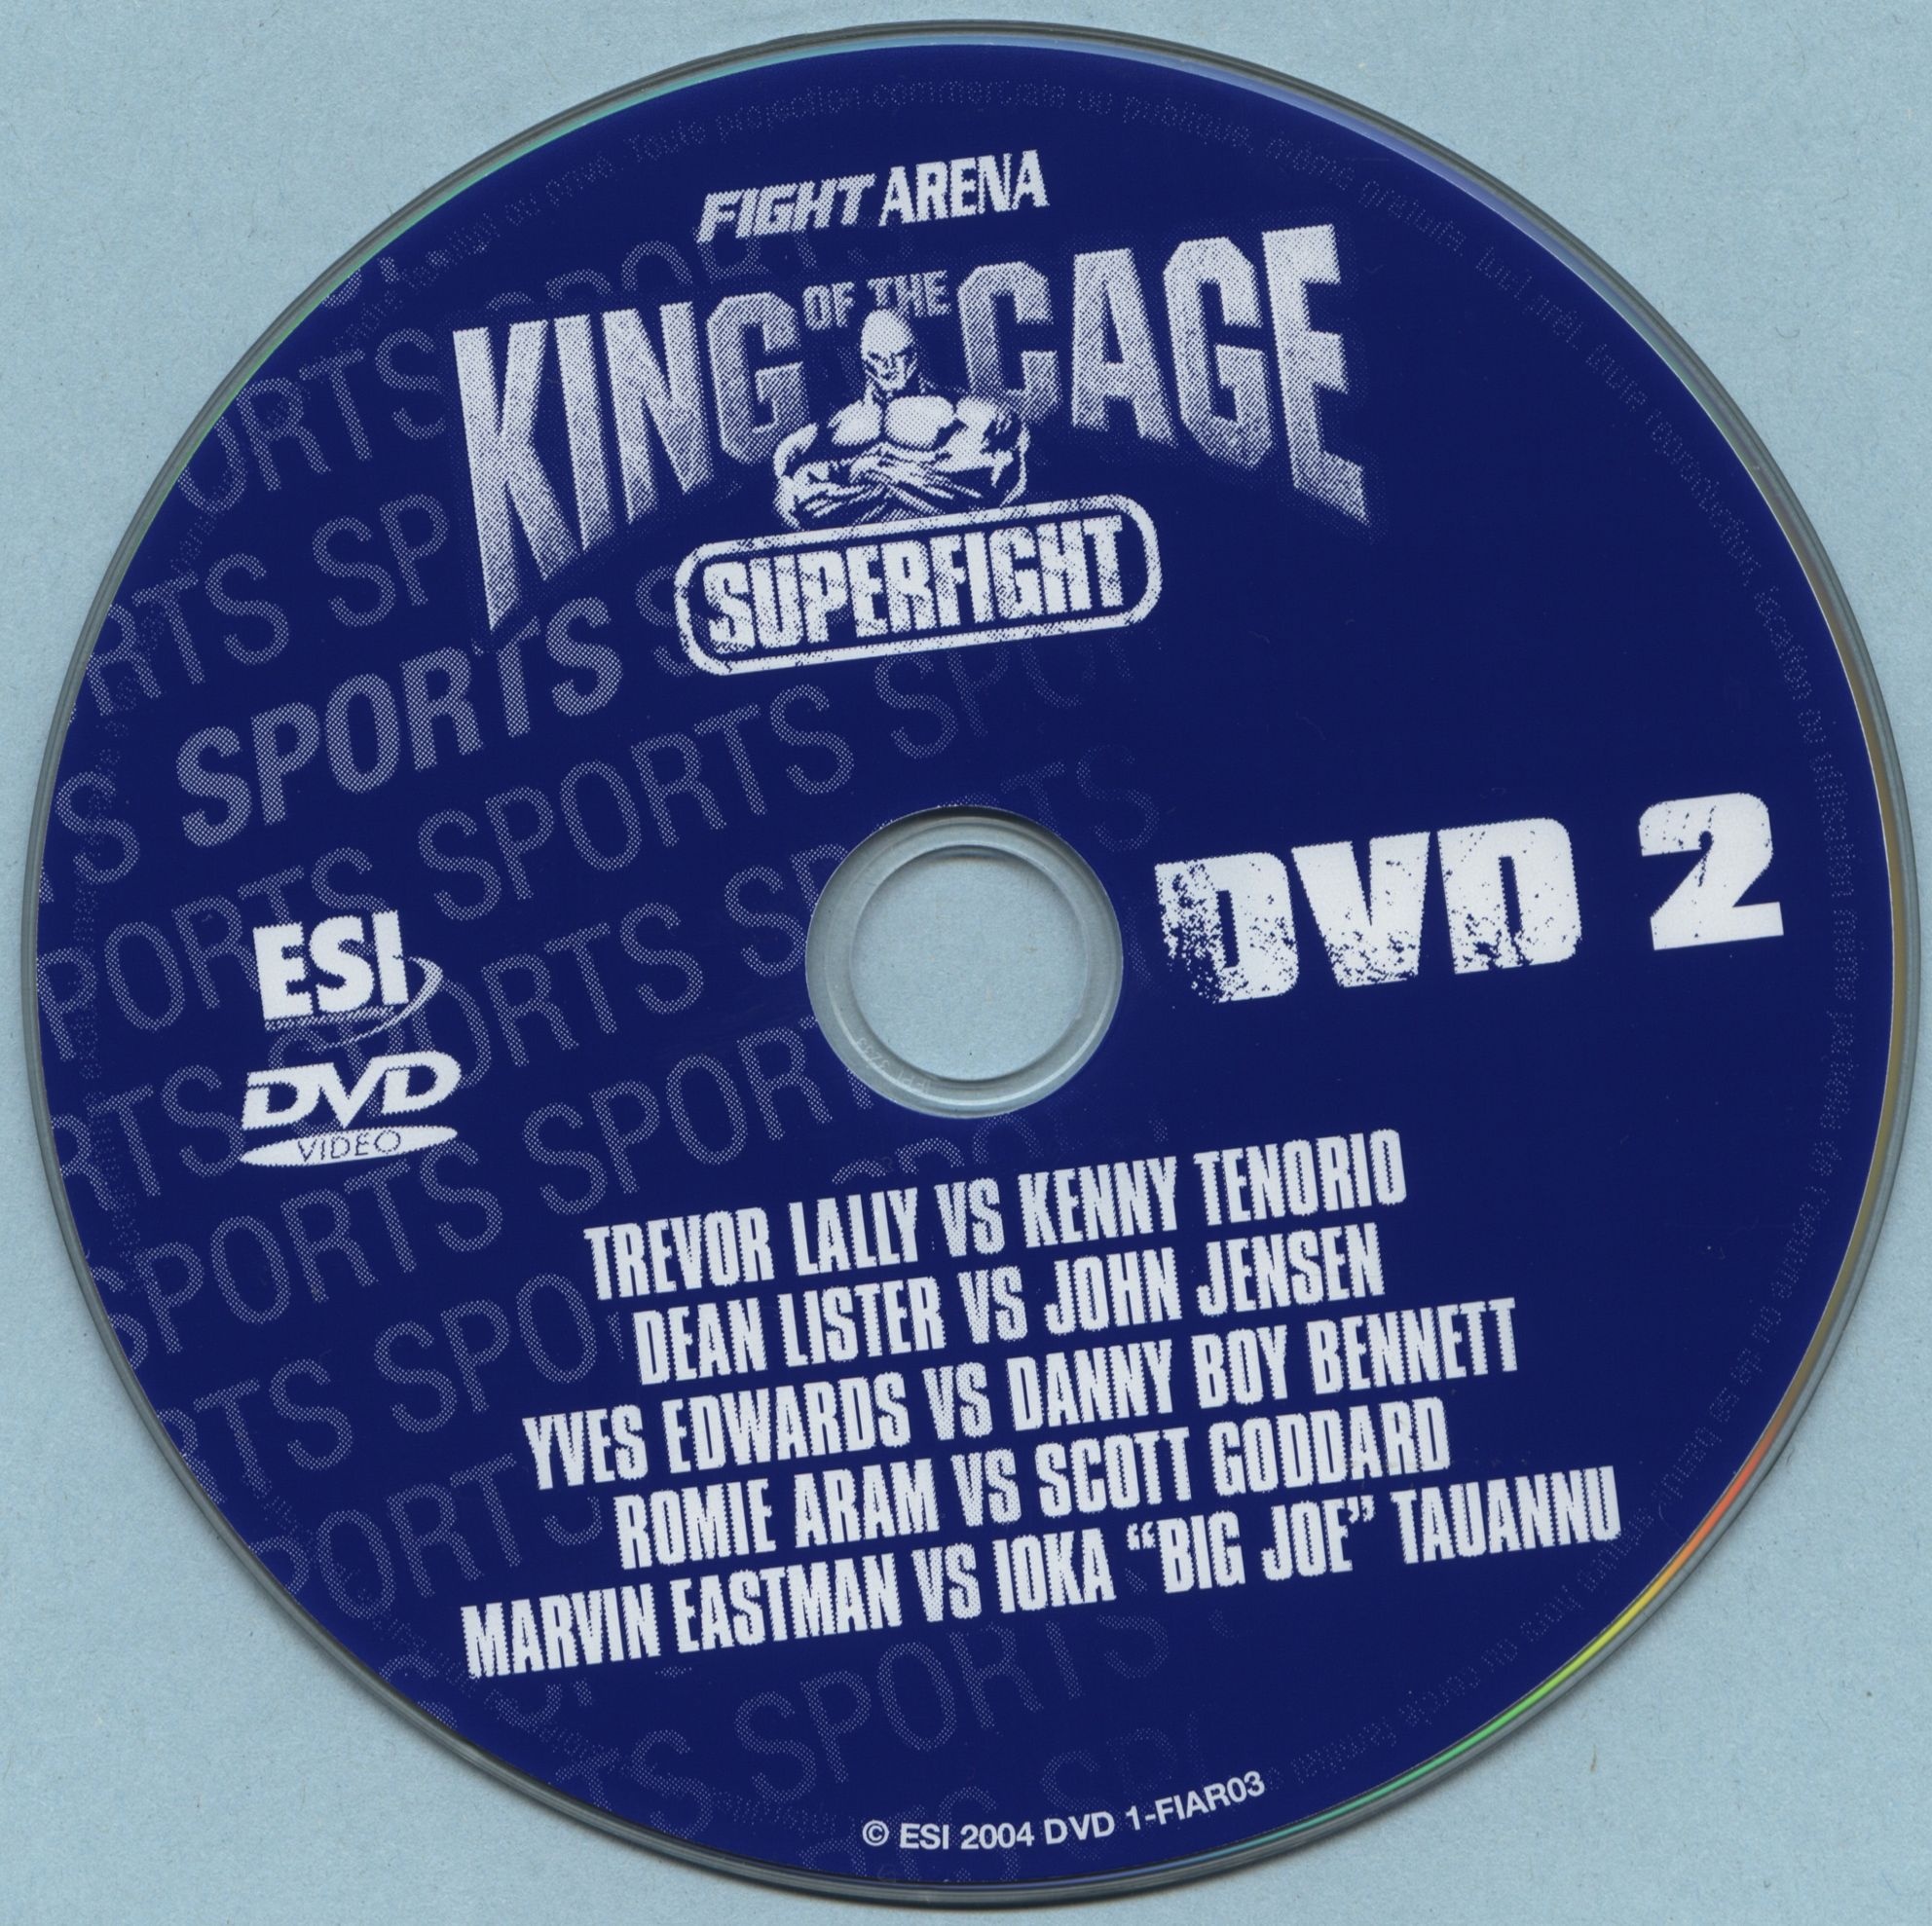 King of the cage superfight DVD 2